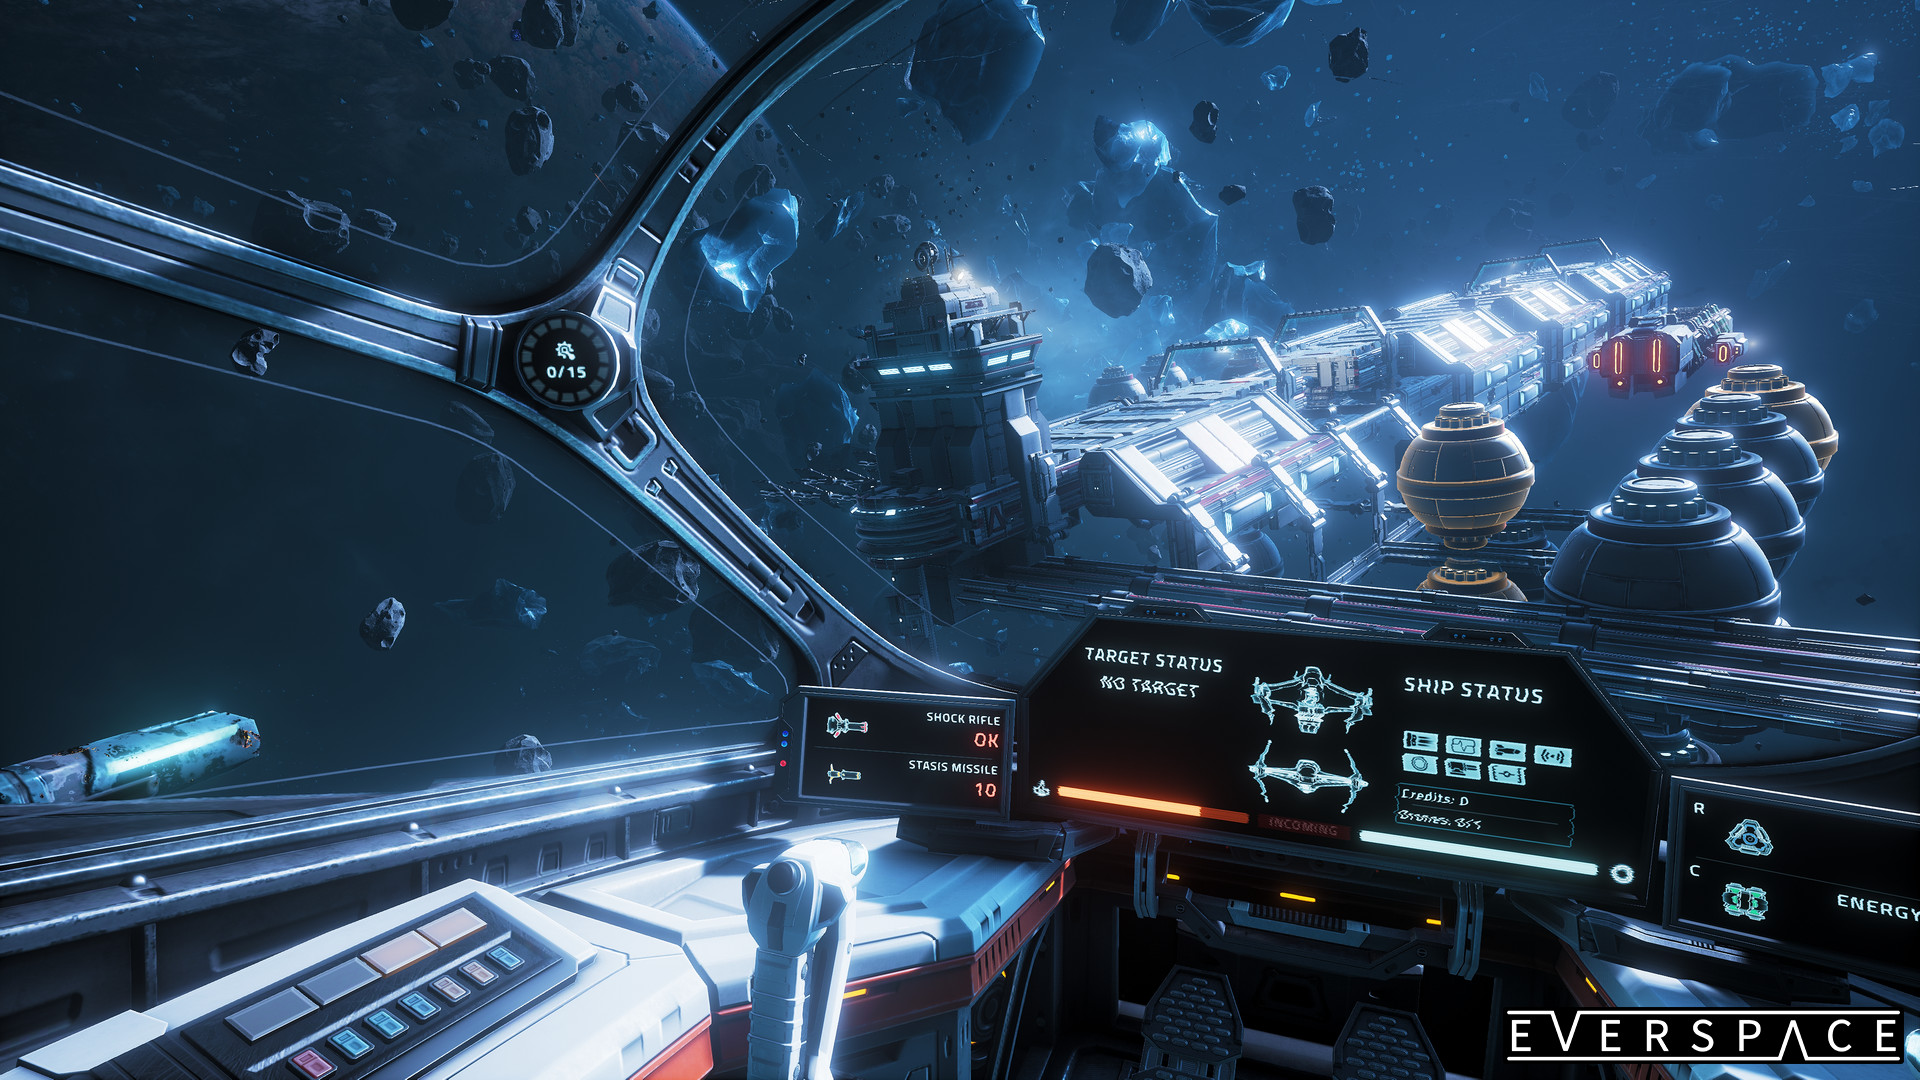 EVERSPACE Pc Game Free Download Torrent